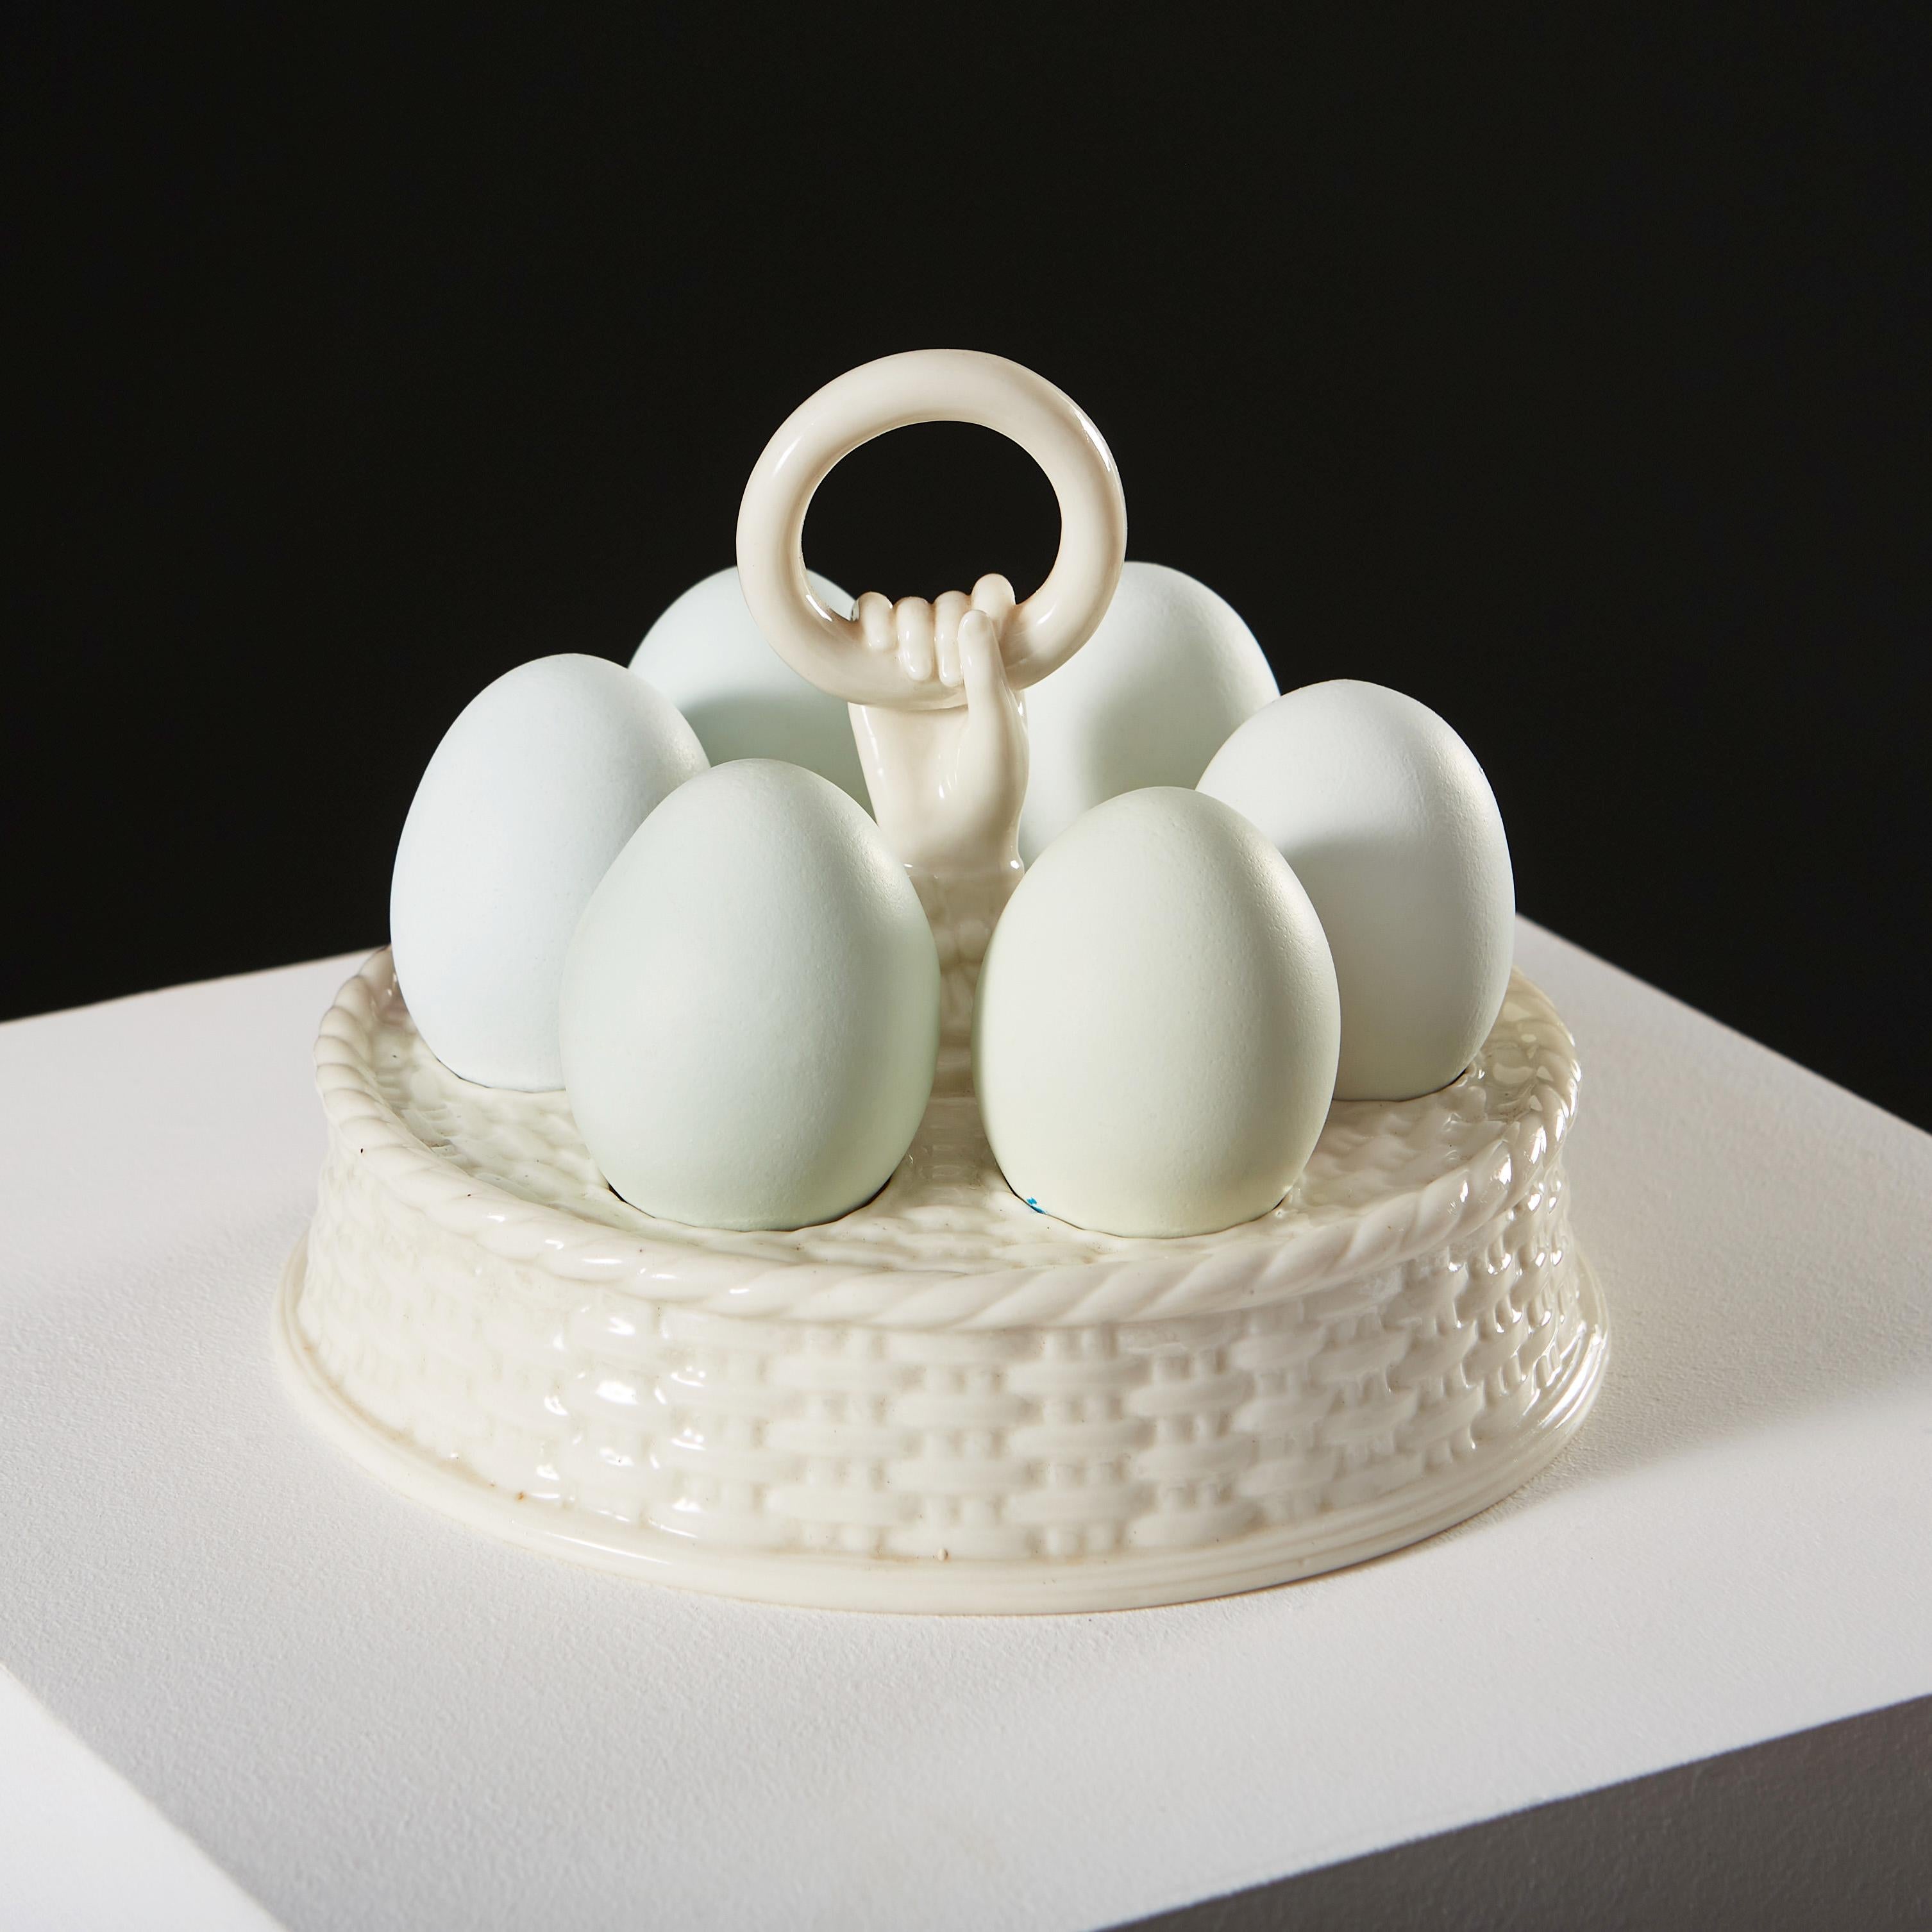 An early twentieth century egg holder for six eggs, with basket weave decoration to the sides and top, with protruding hand and ring to the centre.